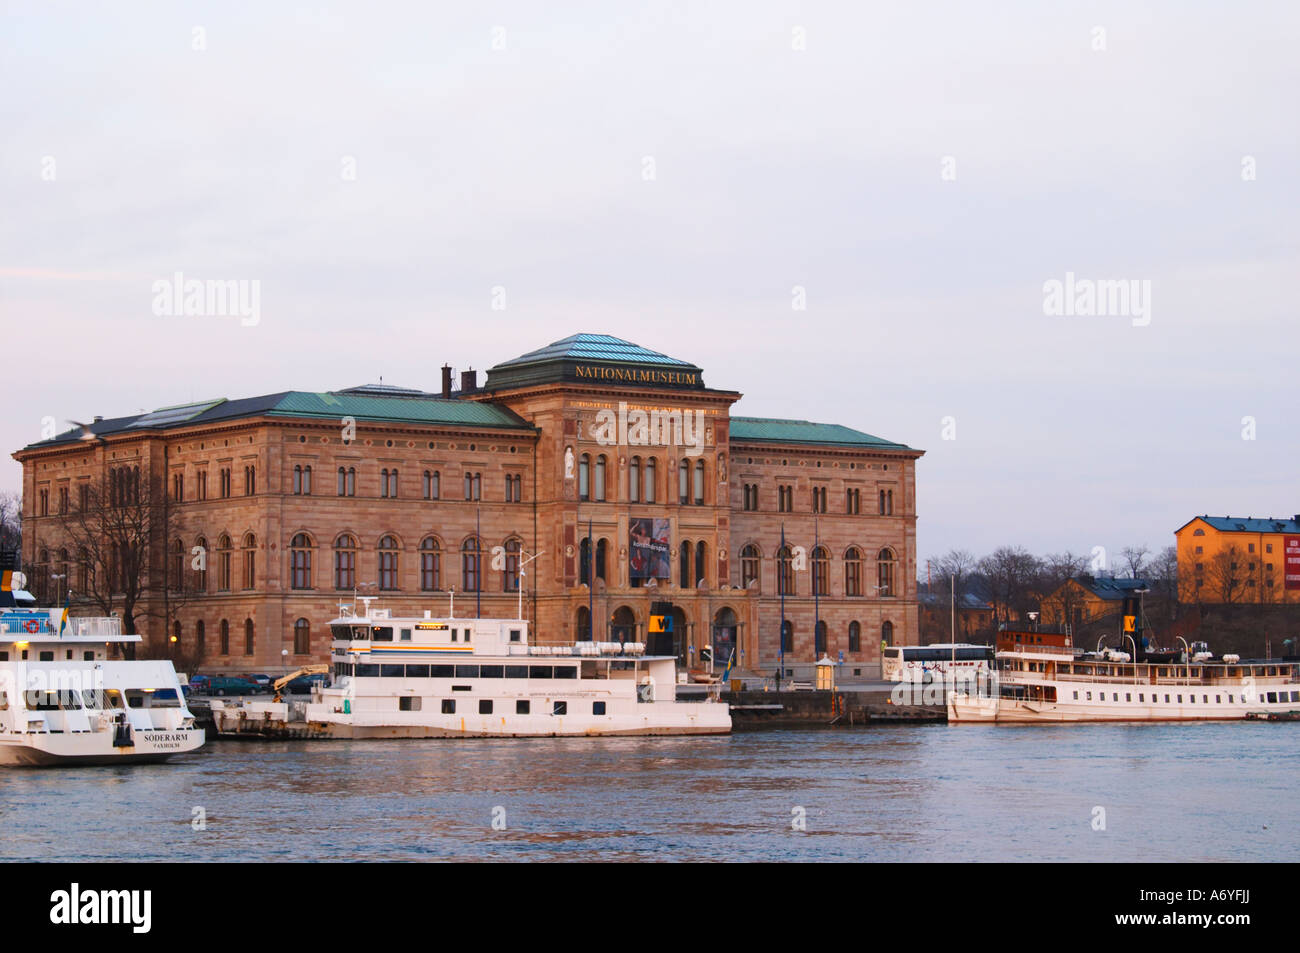 The National Museum, Nationalmuseet, for the fine arts on Blasieholmen. White Waxholm boats in front. White Waxholm boats Waxholmsbatar typical for the archipelago traffic. Stockholm. Sweden, Europe. Stock Photo